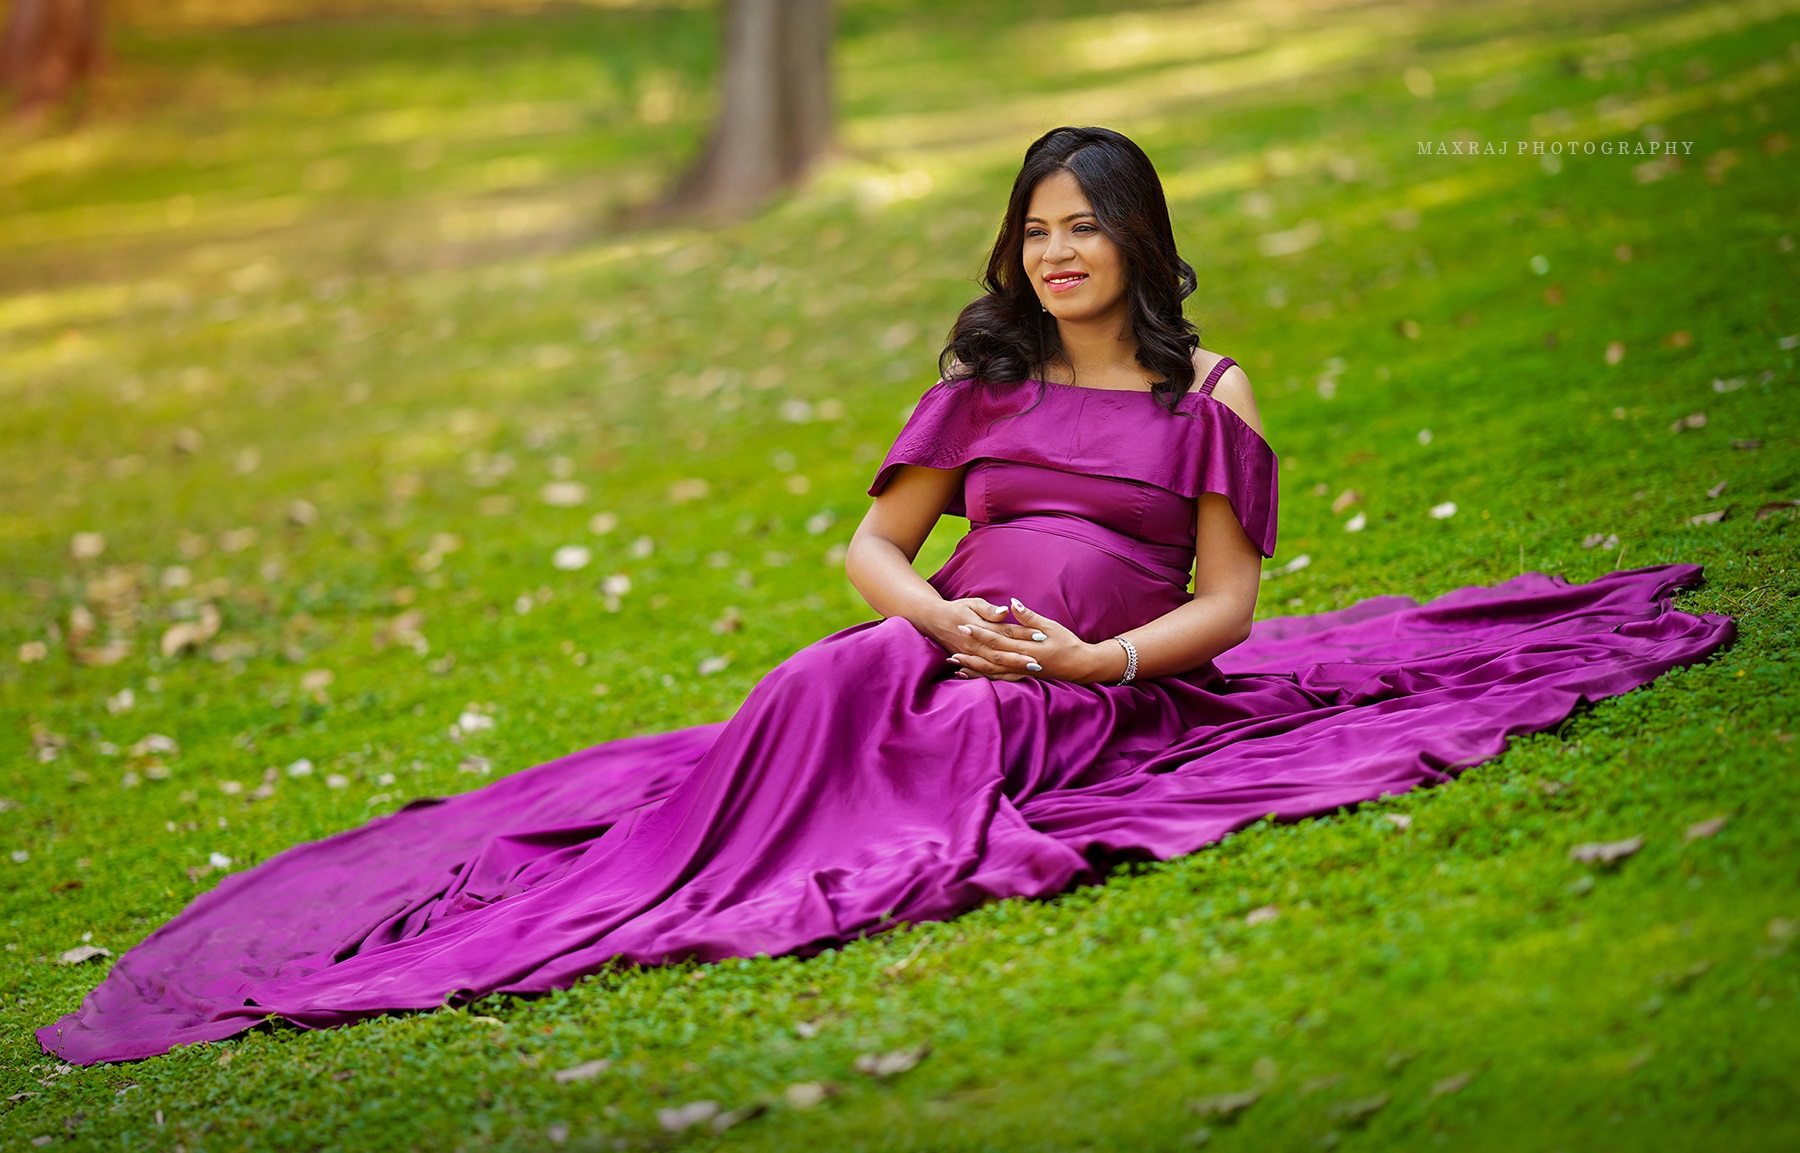 best maternity photographer in india, best maternity photographer in pune, maternity photoshoot in pune in purple dress